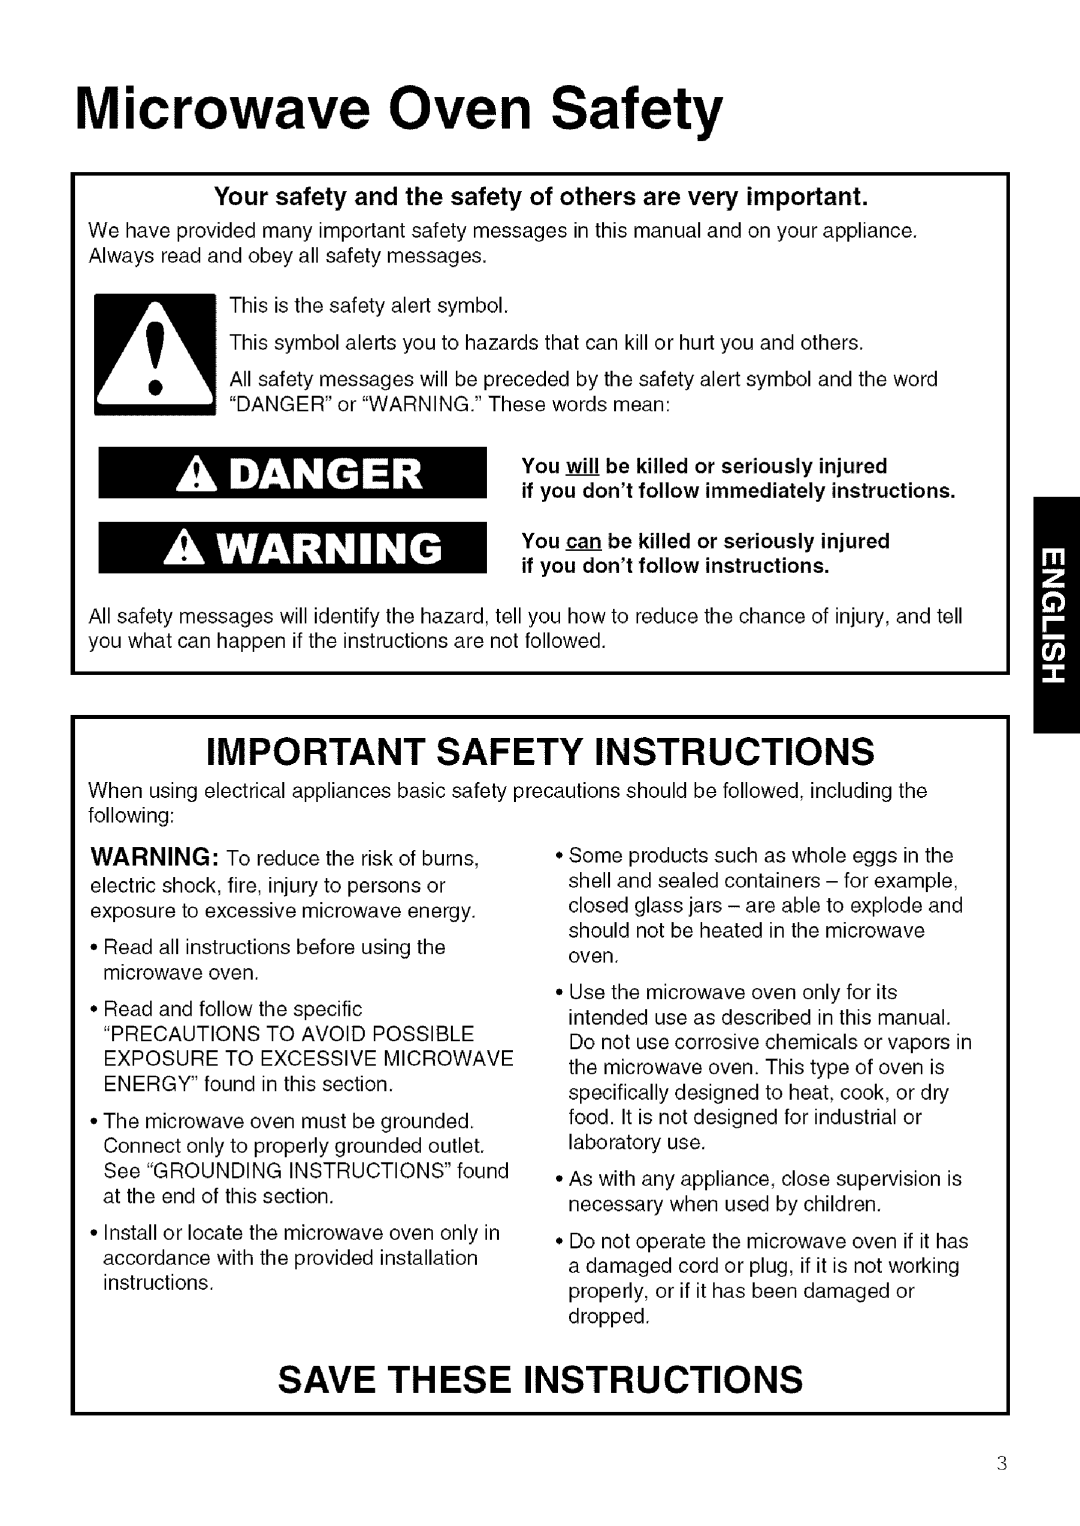 Kenmore 721.80604, 721.80603, 721.80602 manual Microwave Oven Safety, Important Safety Instructions, Save These Instructions 